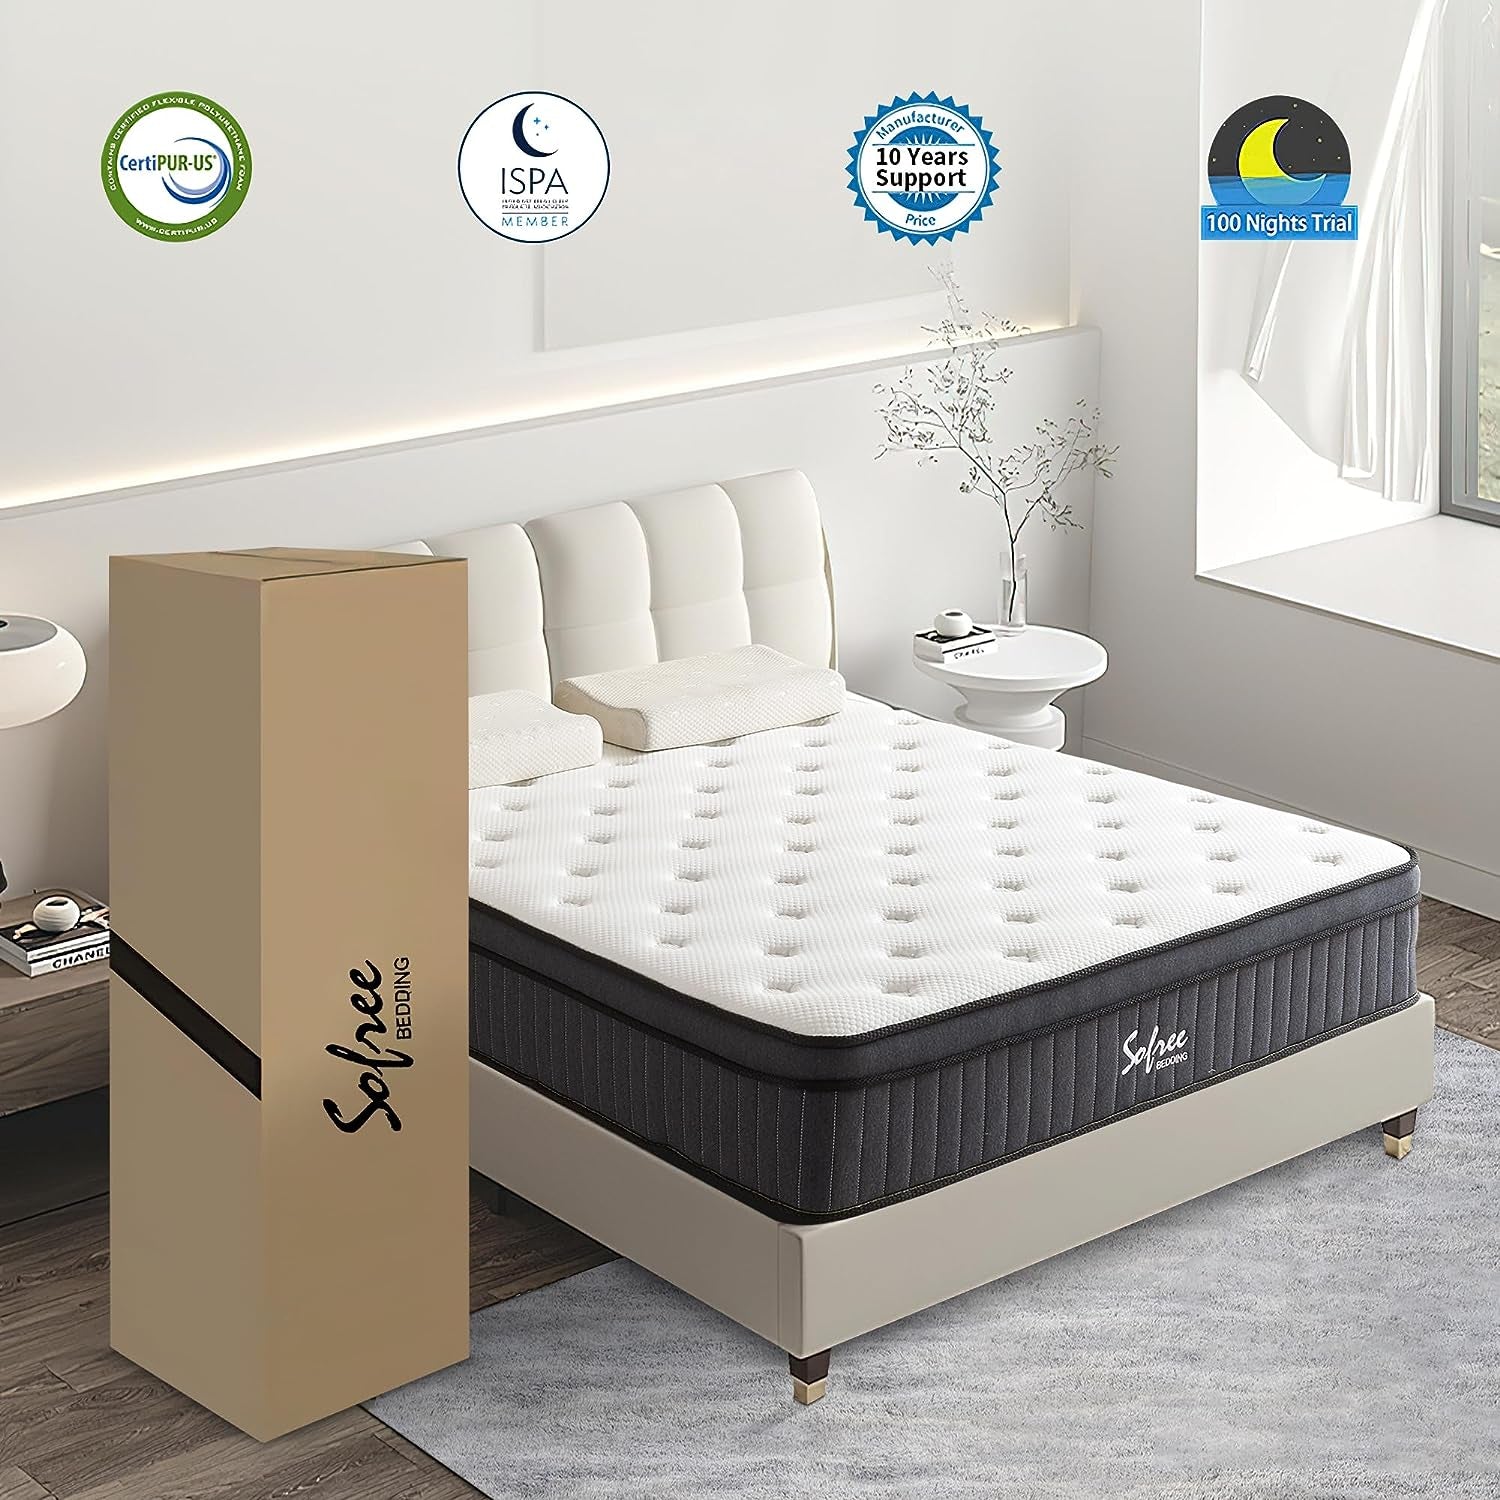 King Mattress, 12 Inch Memory Foam Hybrid Mattress King, Pocket Spring Mattress in a Box for Motion Isolation, Strong Edge Support, Pressure Relief, Plush Feel, Certipur-Us